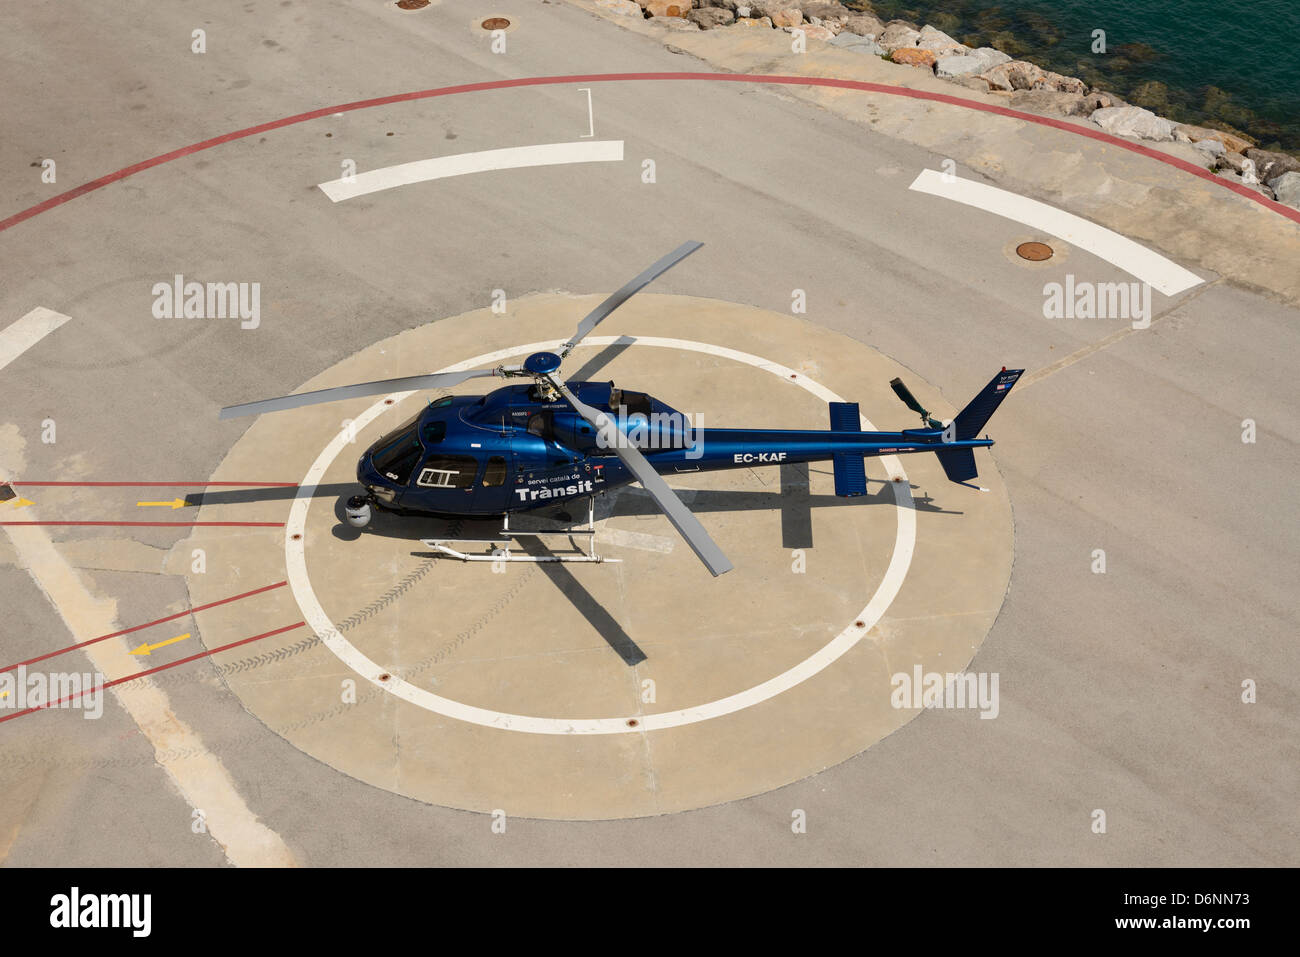 AS355 Ecureuil 2 (Twin Squirrel) helicopter made by Aérospatiale, (Eurocopter Group) Servei Català de Trànsit. CAThelicopters Stock Photo